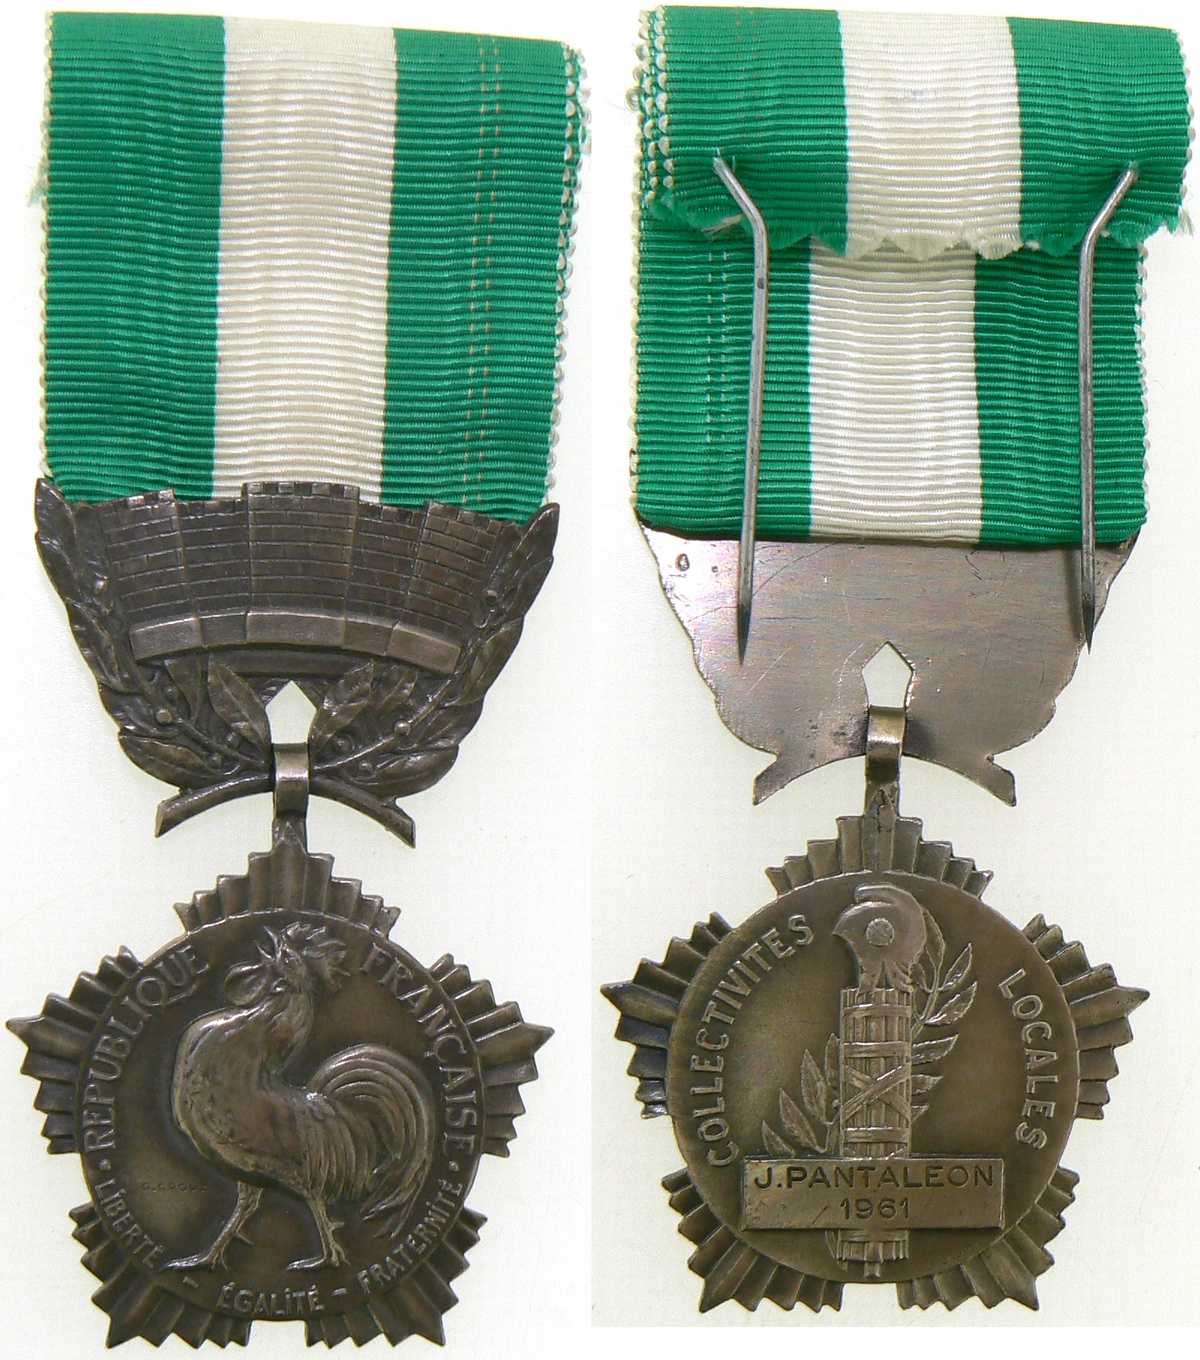 Local Communties Honor Medal - Image 2 of 2